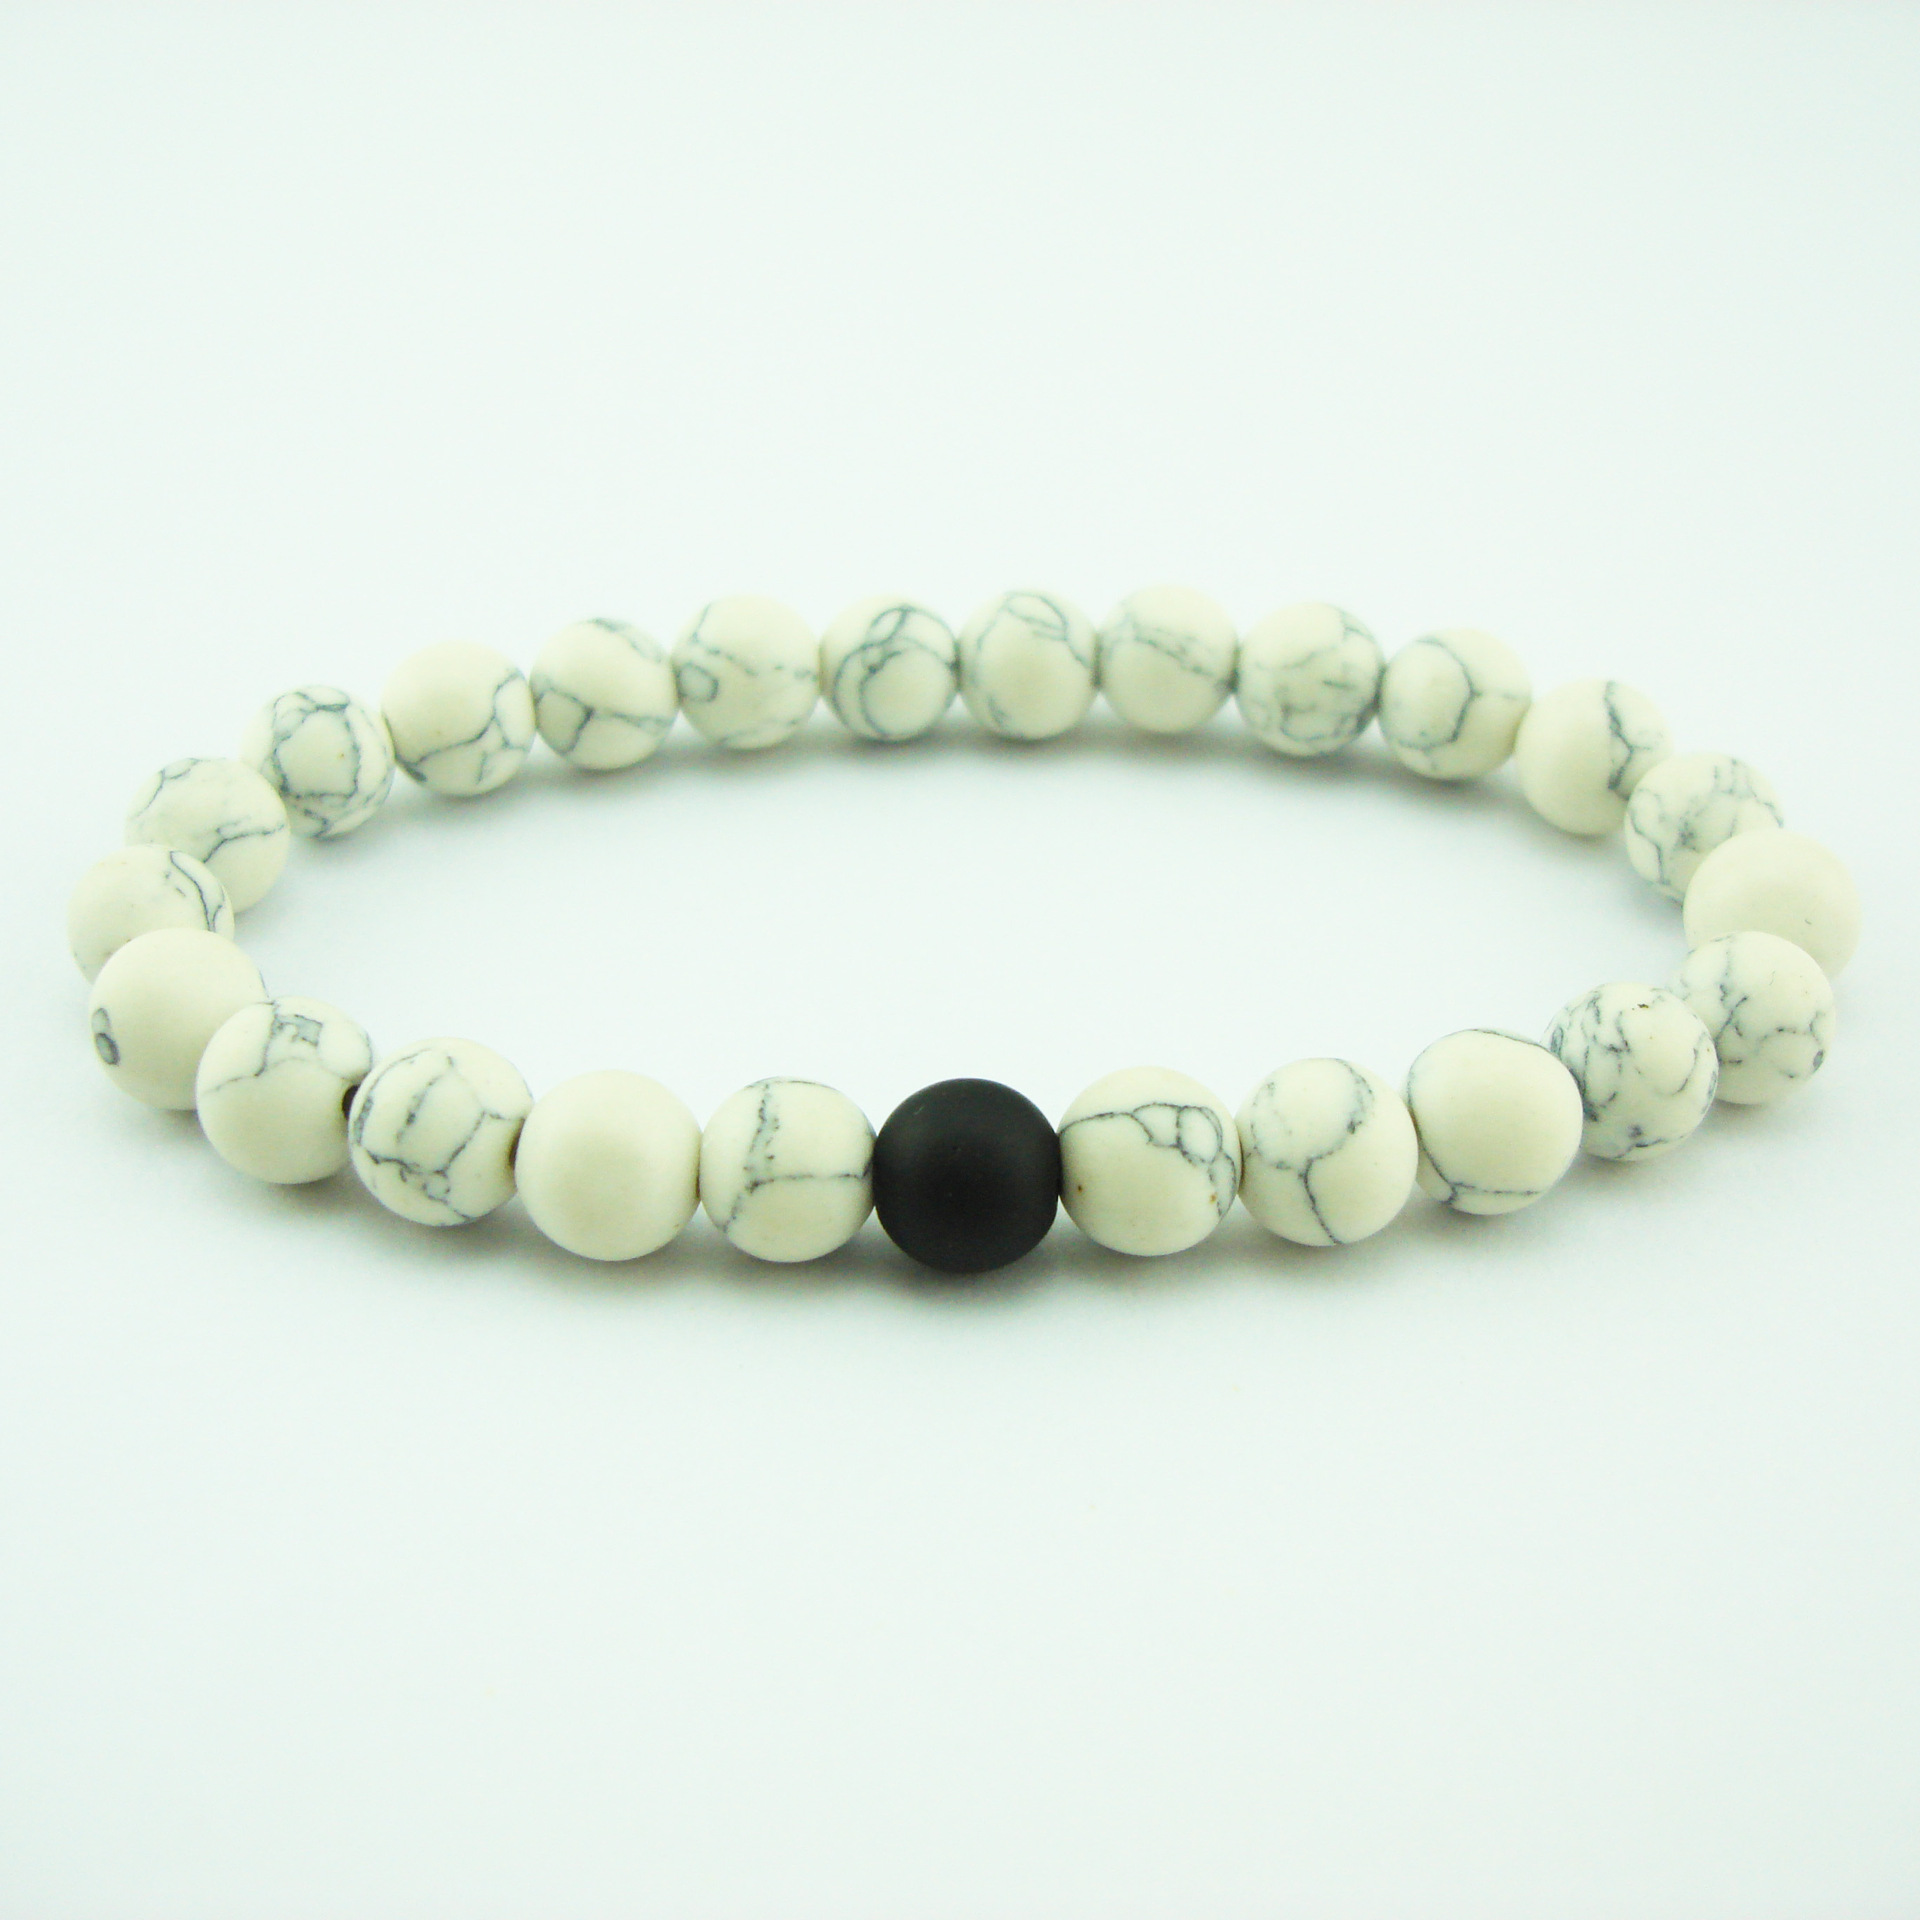 2:White turquoise and frosted black agate